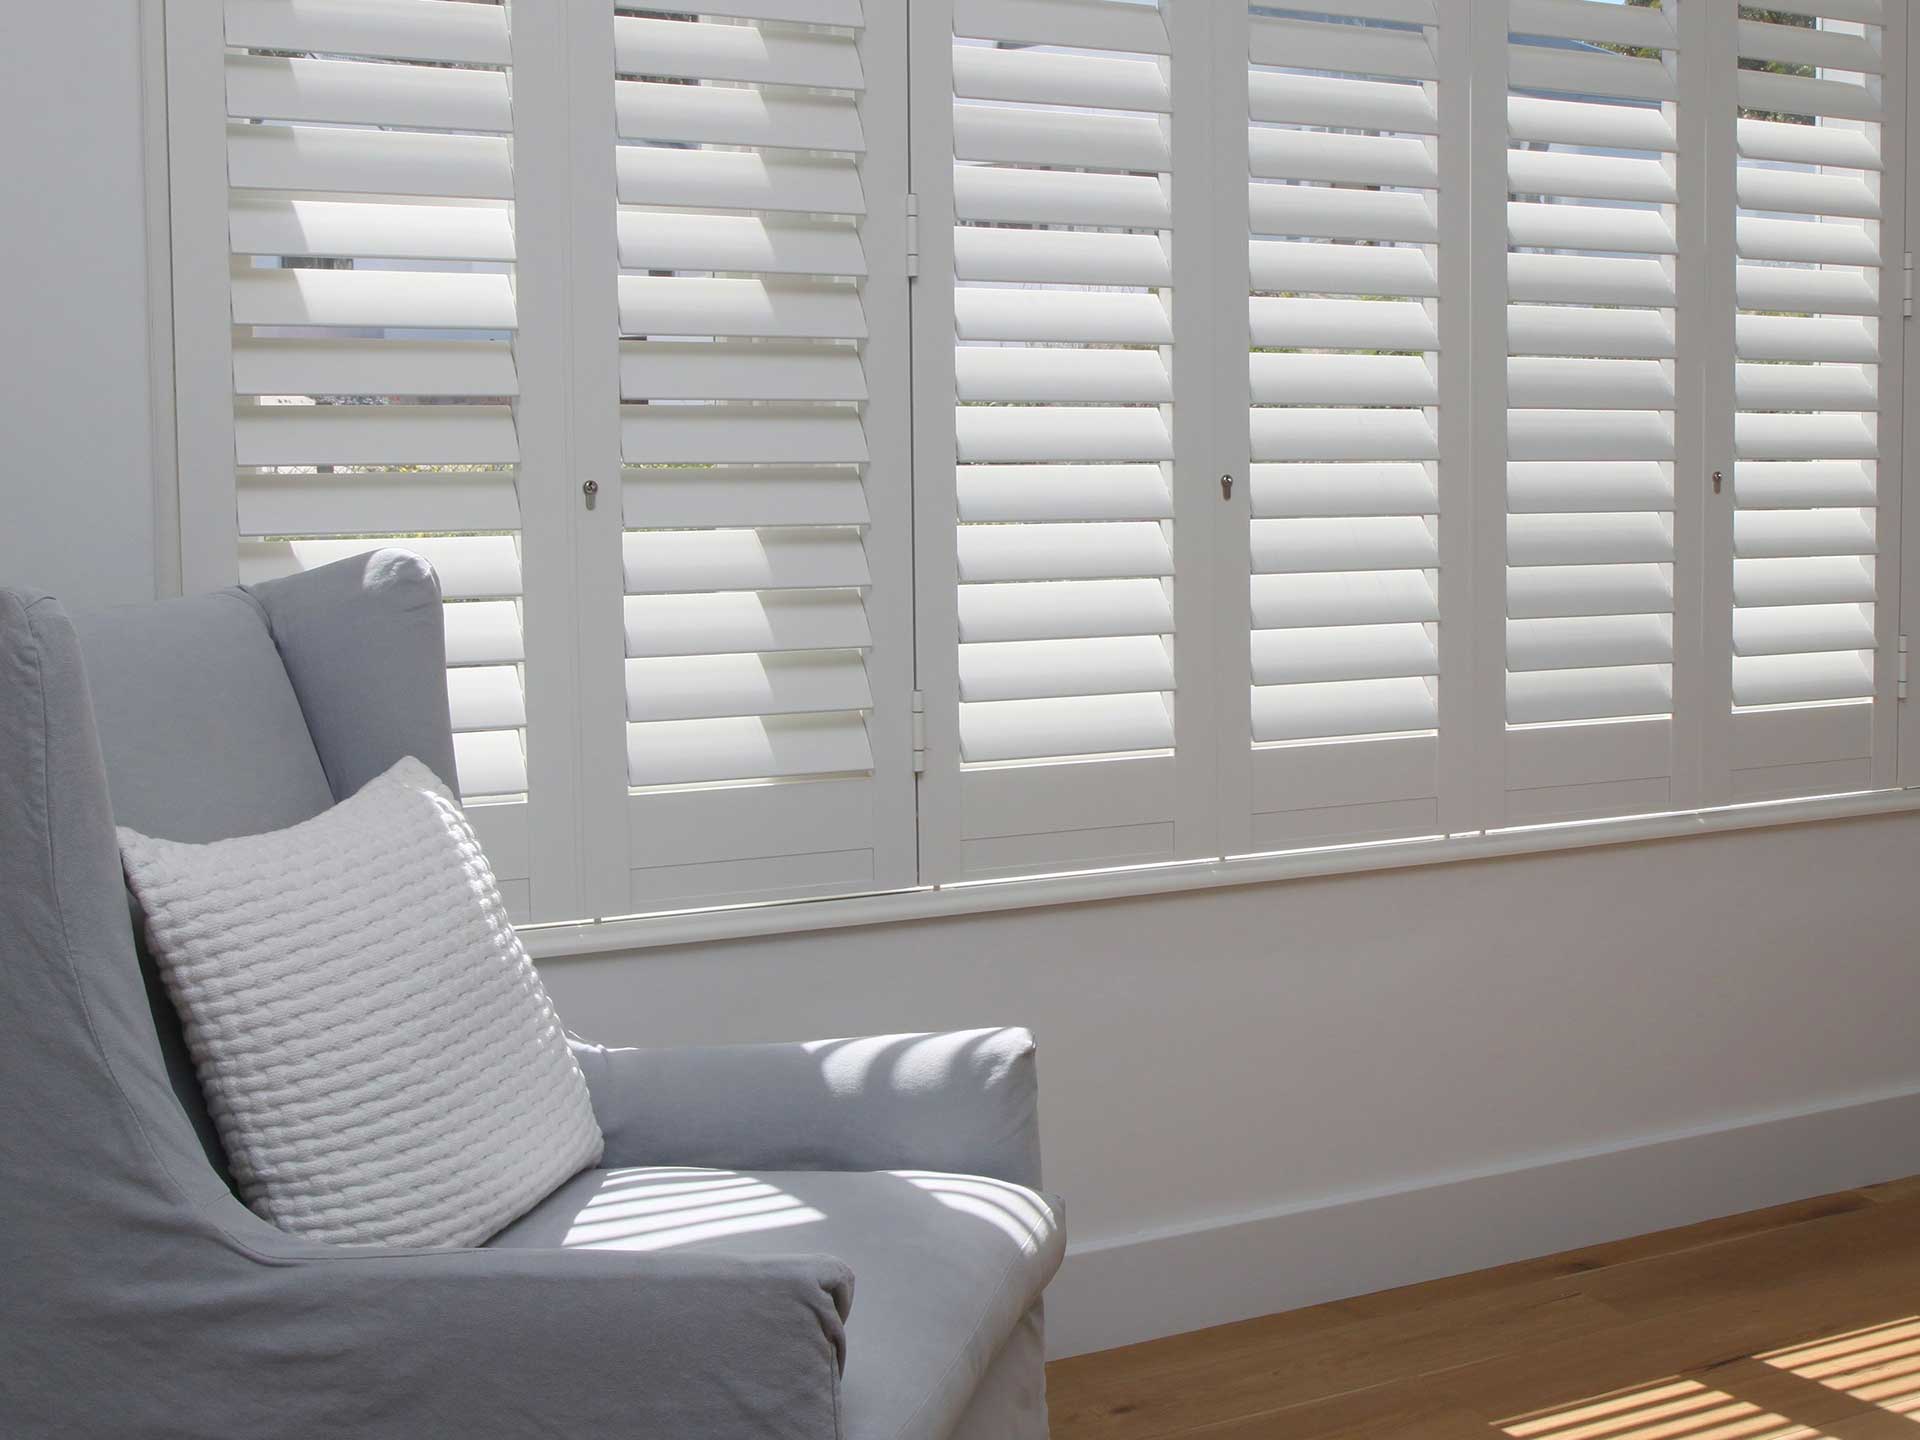 Shutters are a great choice for draught proofing your sash windows